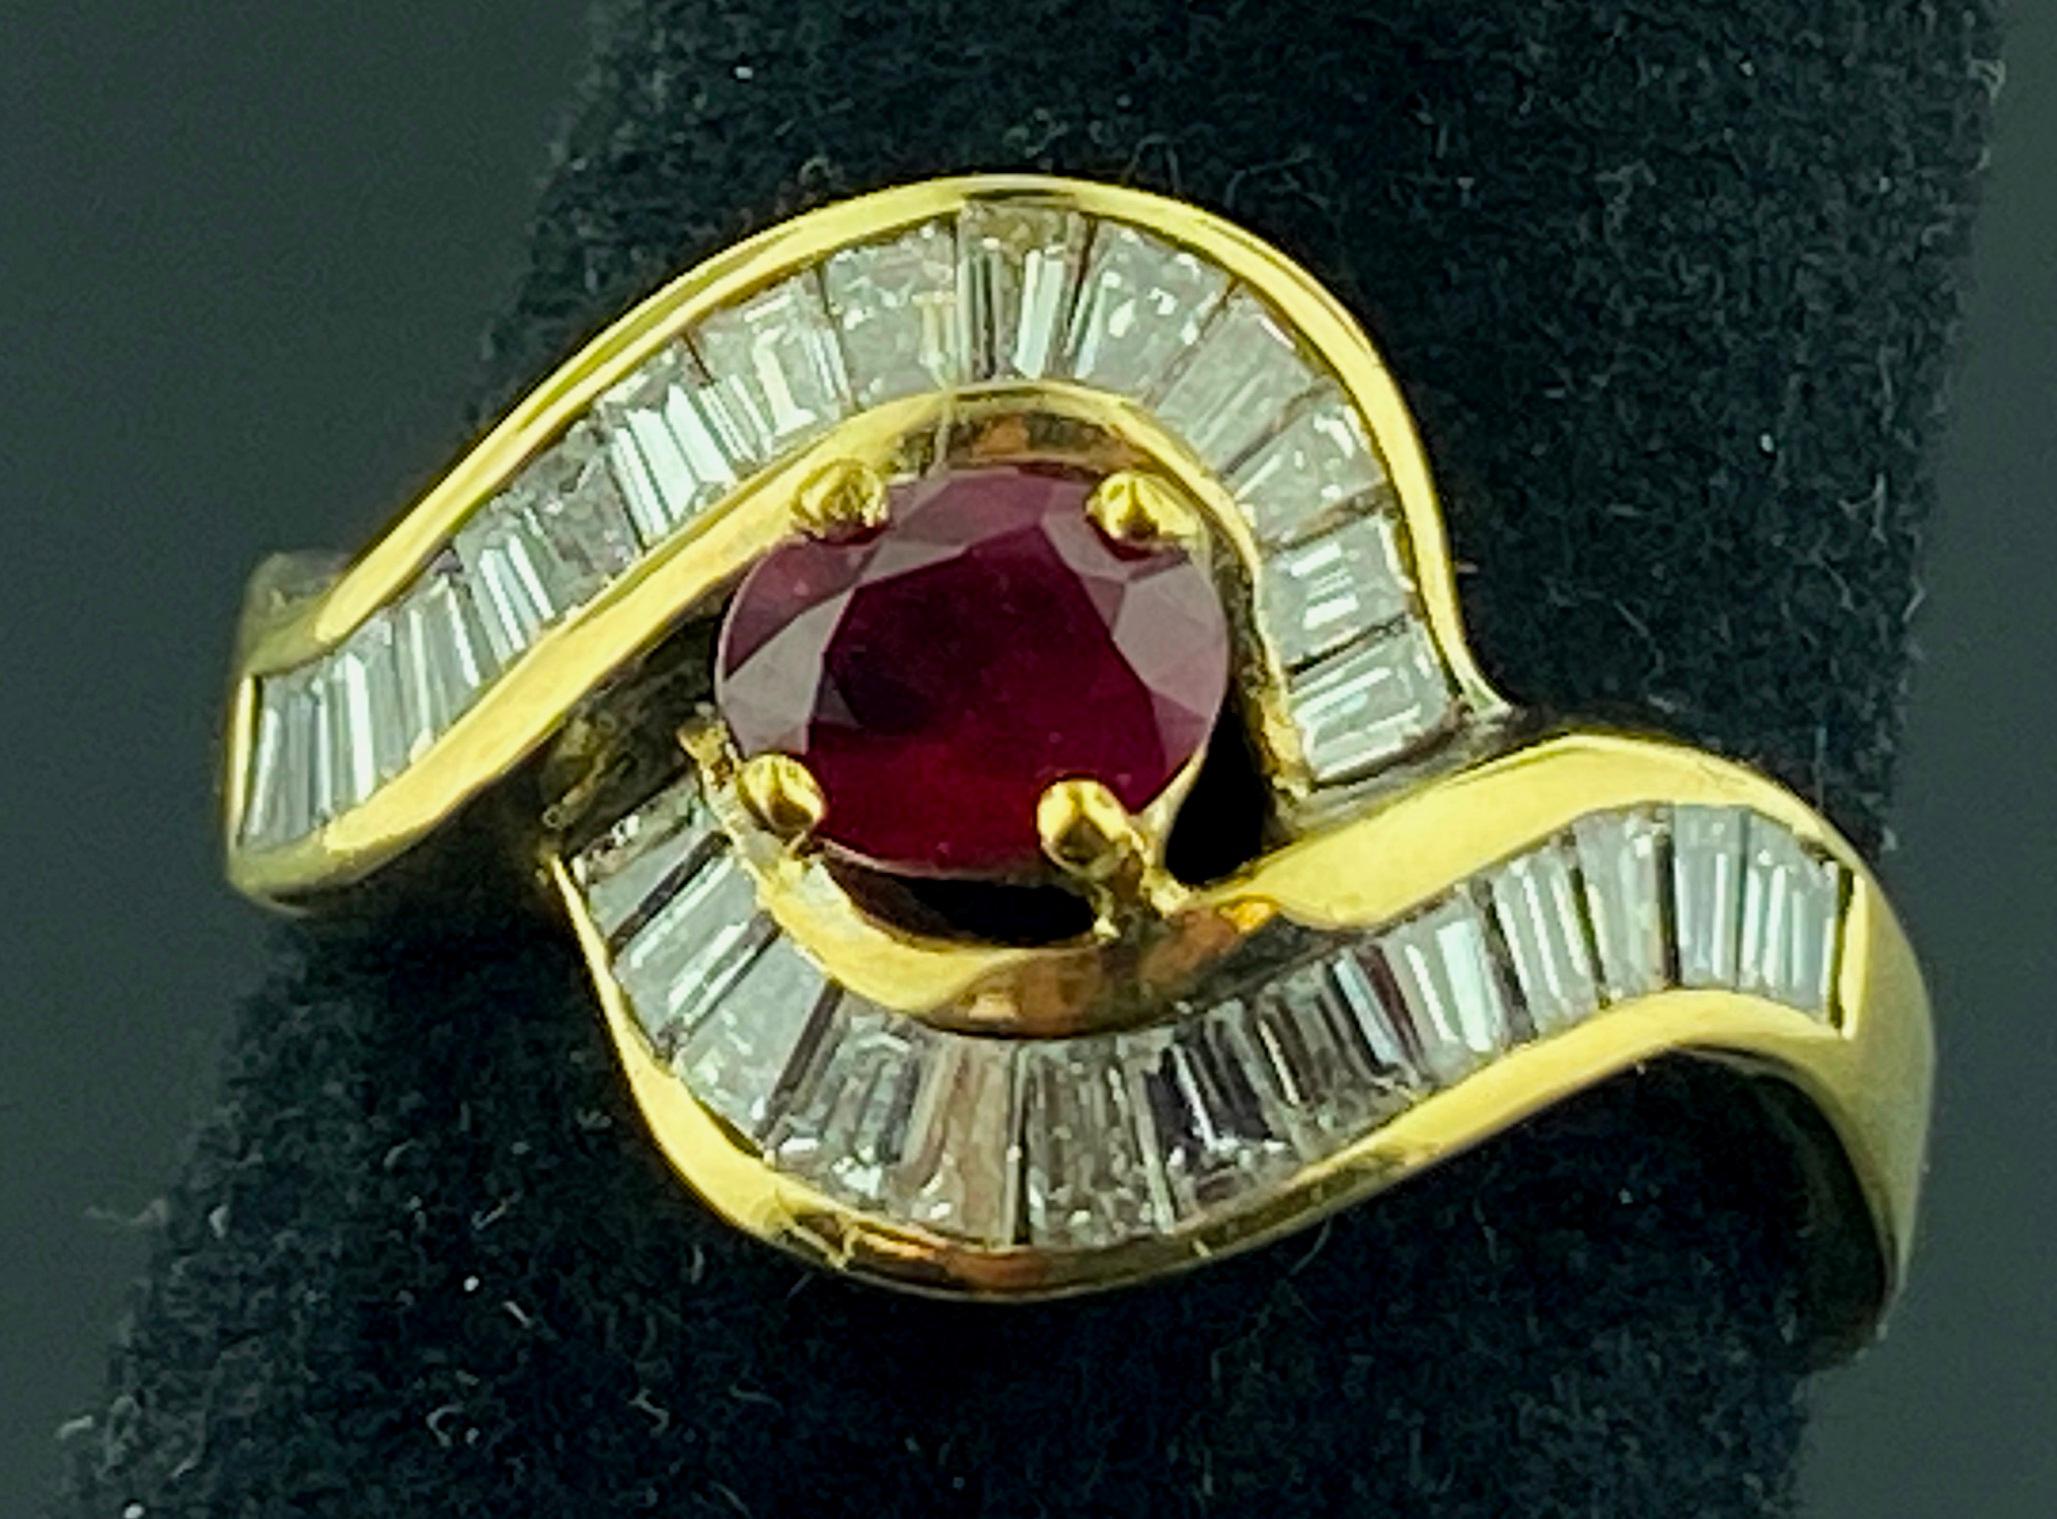 Set in 14 karat yellow gold is a center Ruby weighing 0.60 carats, with 29 baguette cut diamonds surrounding and in mounting with a total diamond weight of1.00 carats.  Color is H, Clarity is VS. Ring size is 7.